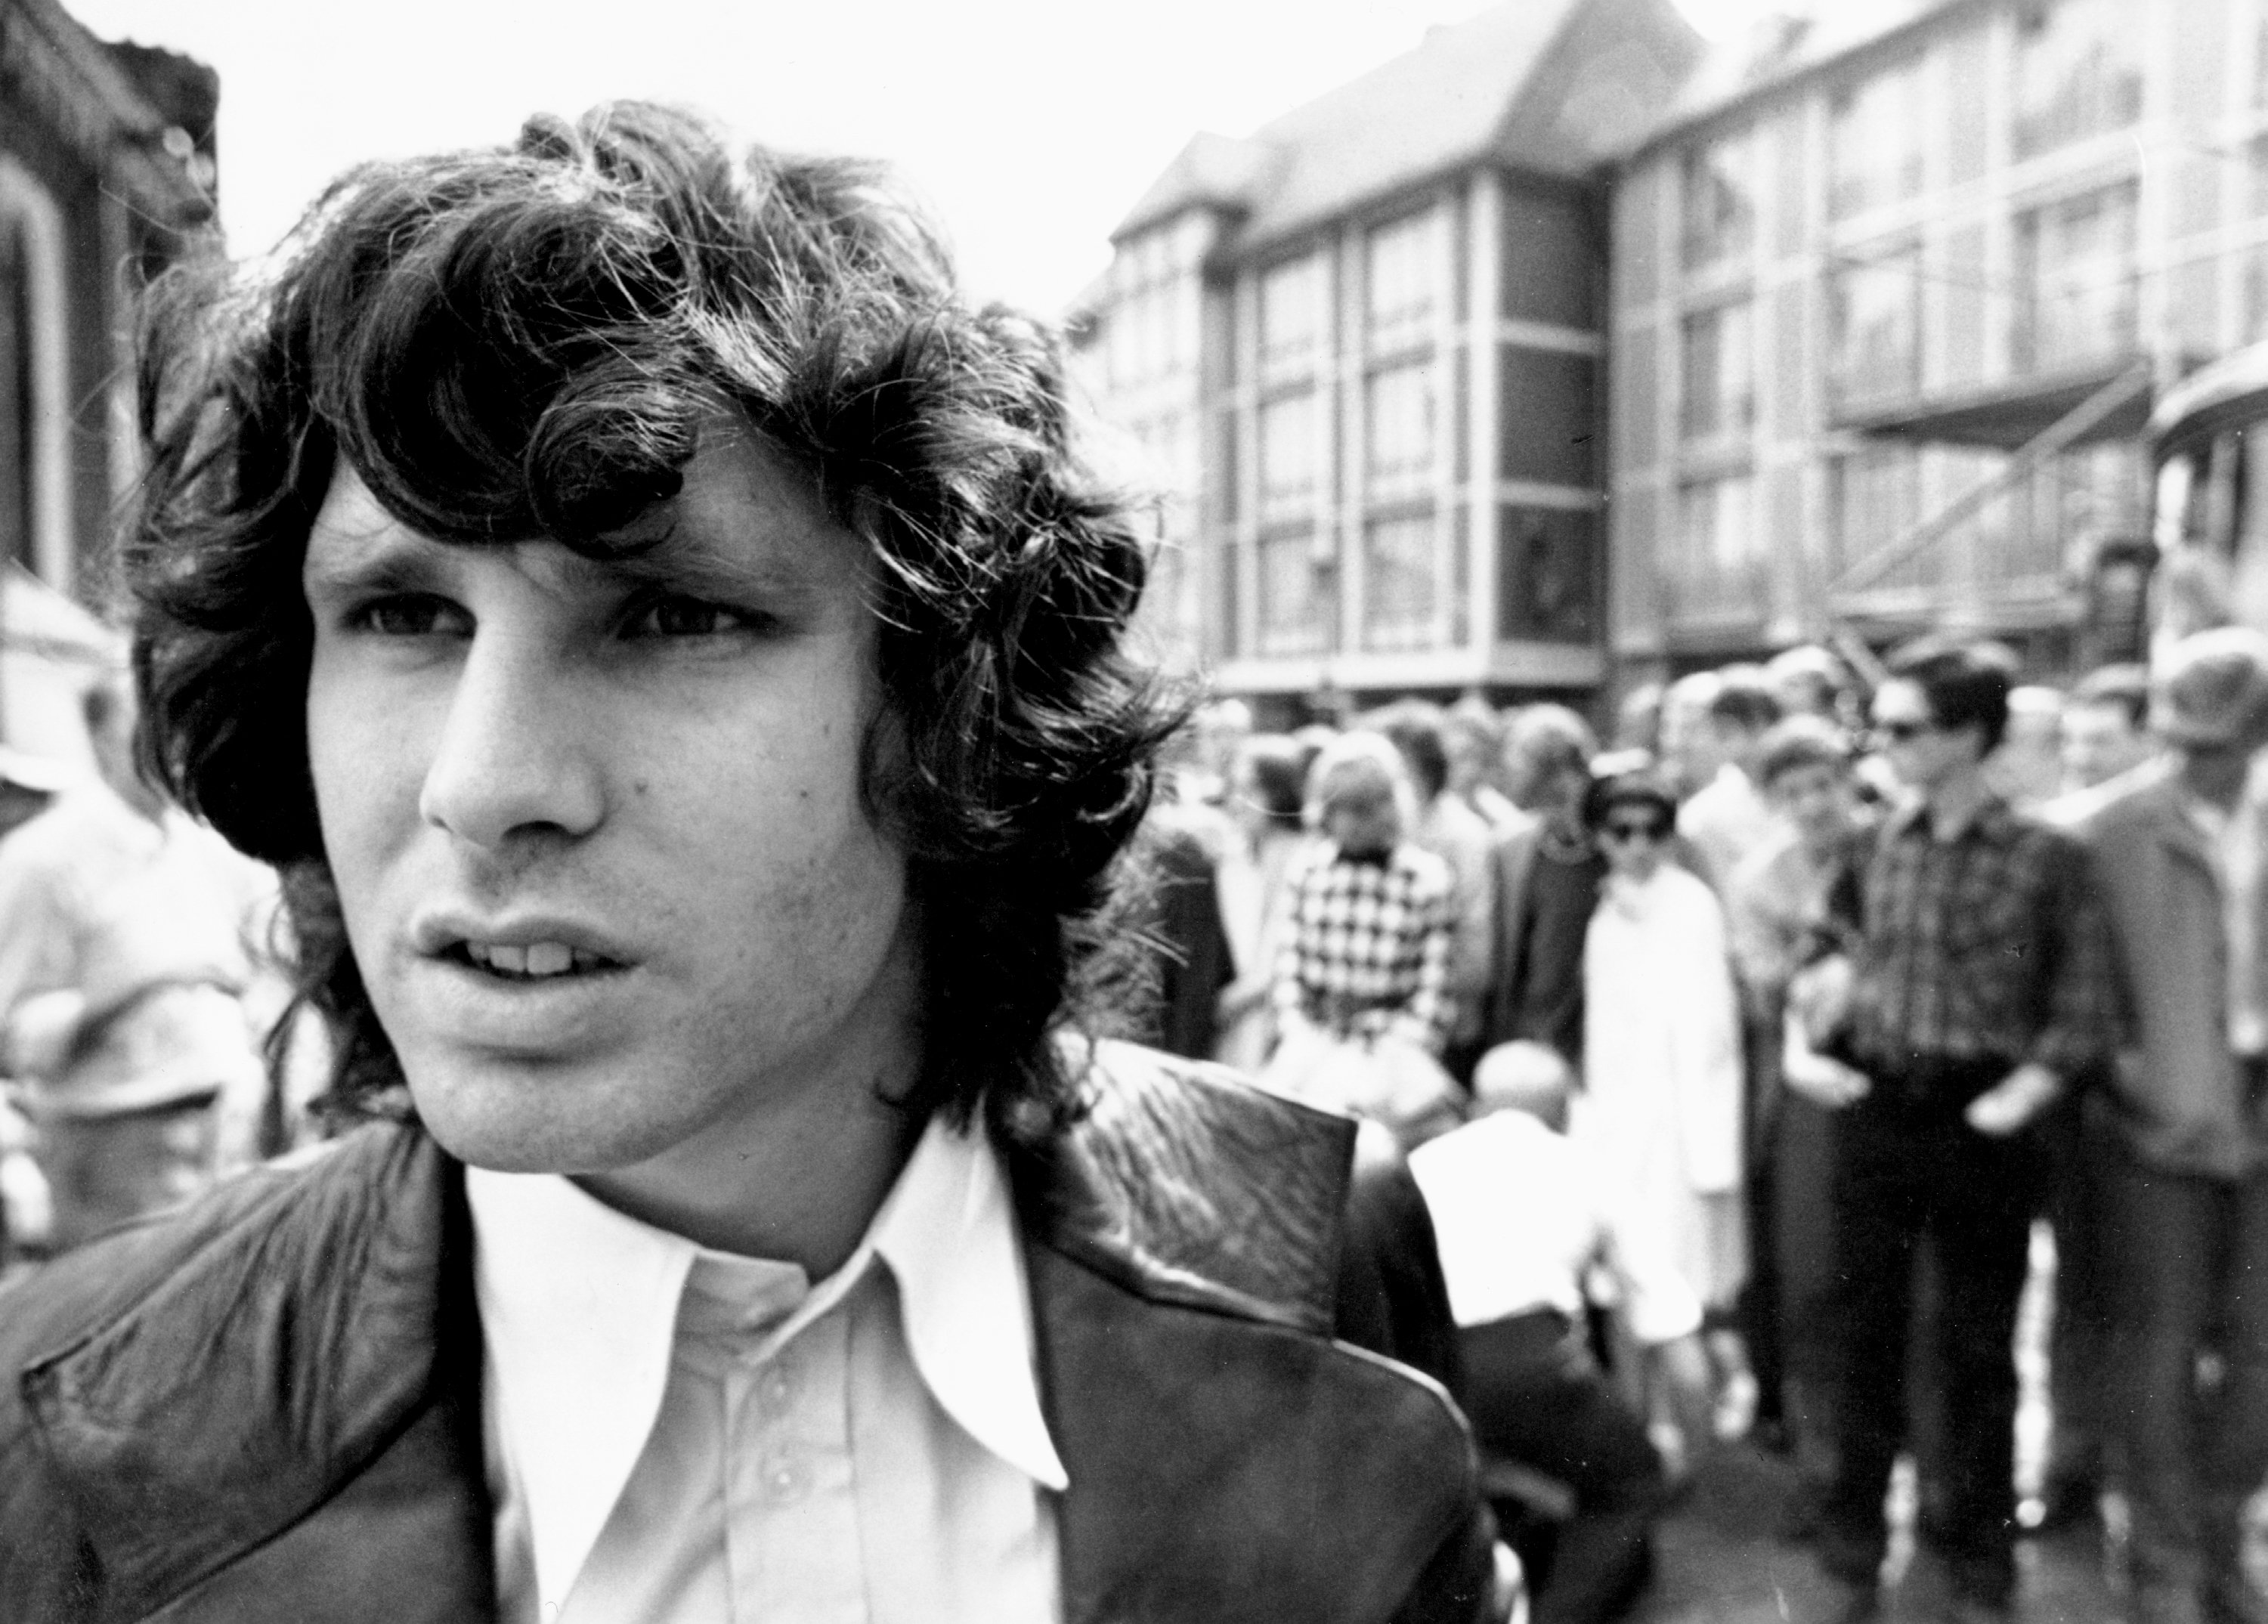  CIRCA 1970: Photo of Jim Morrison. | Source: Getty Images